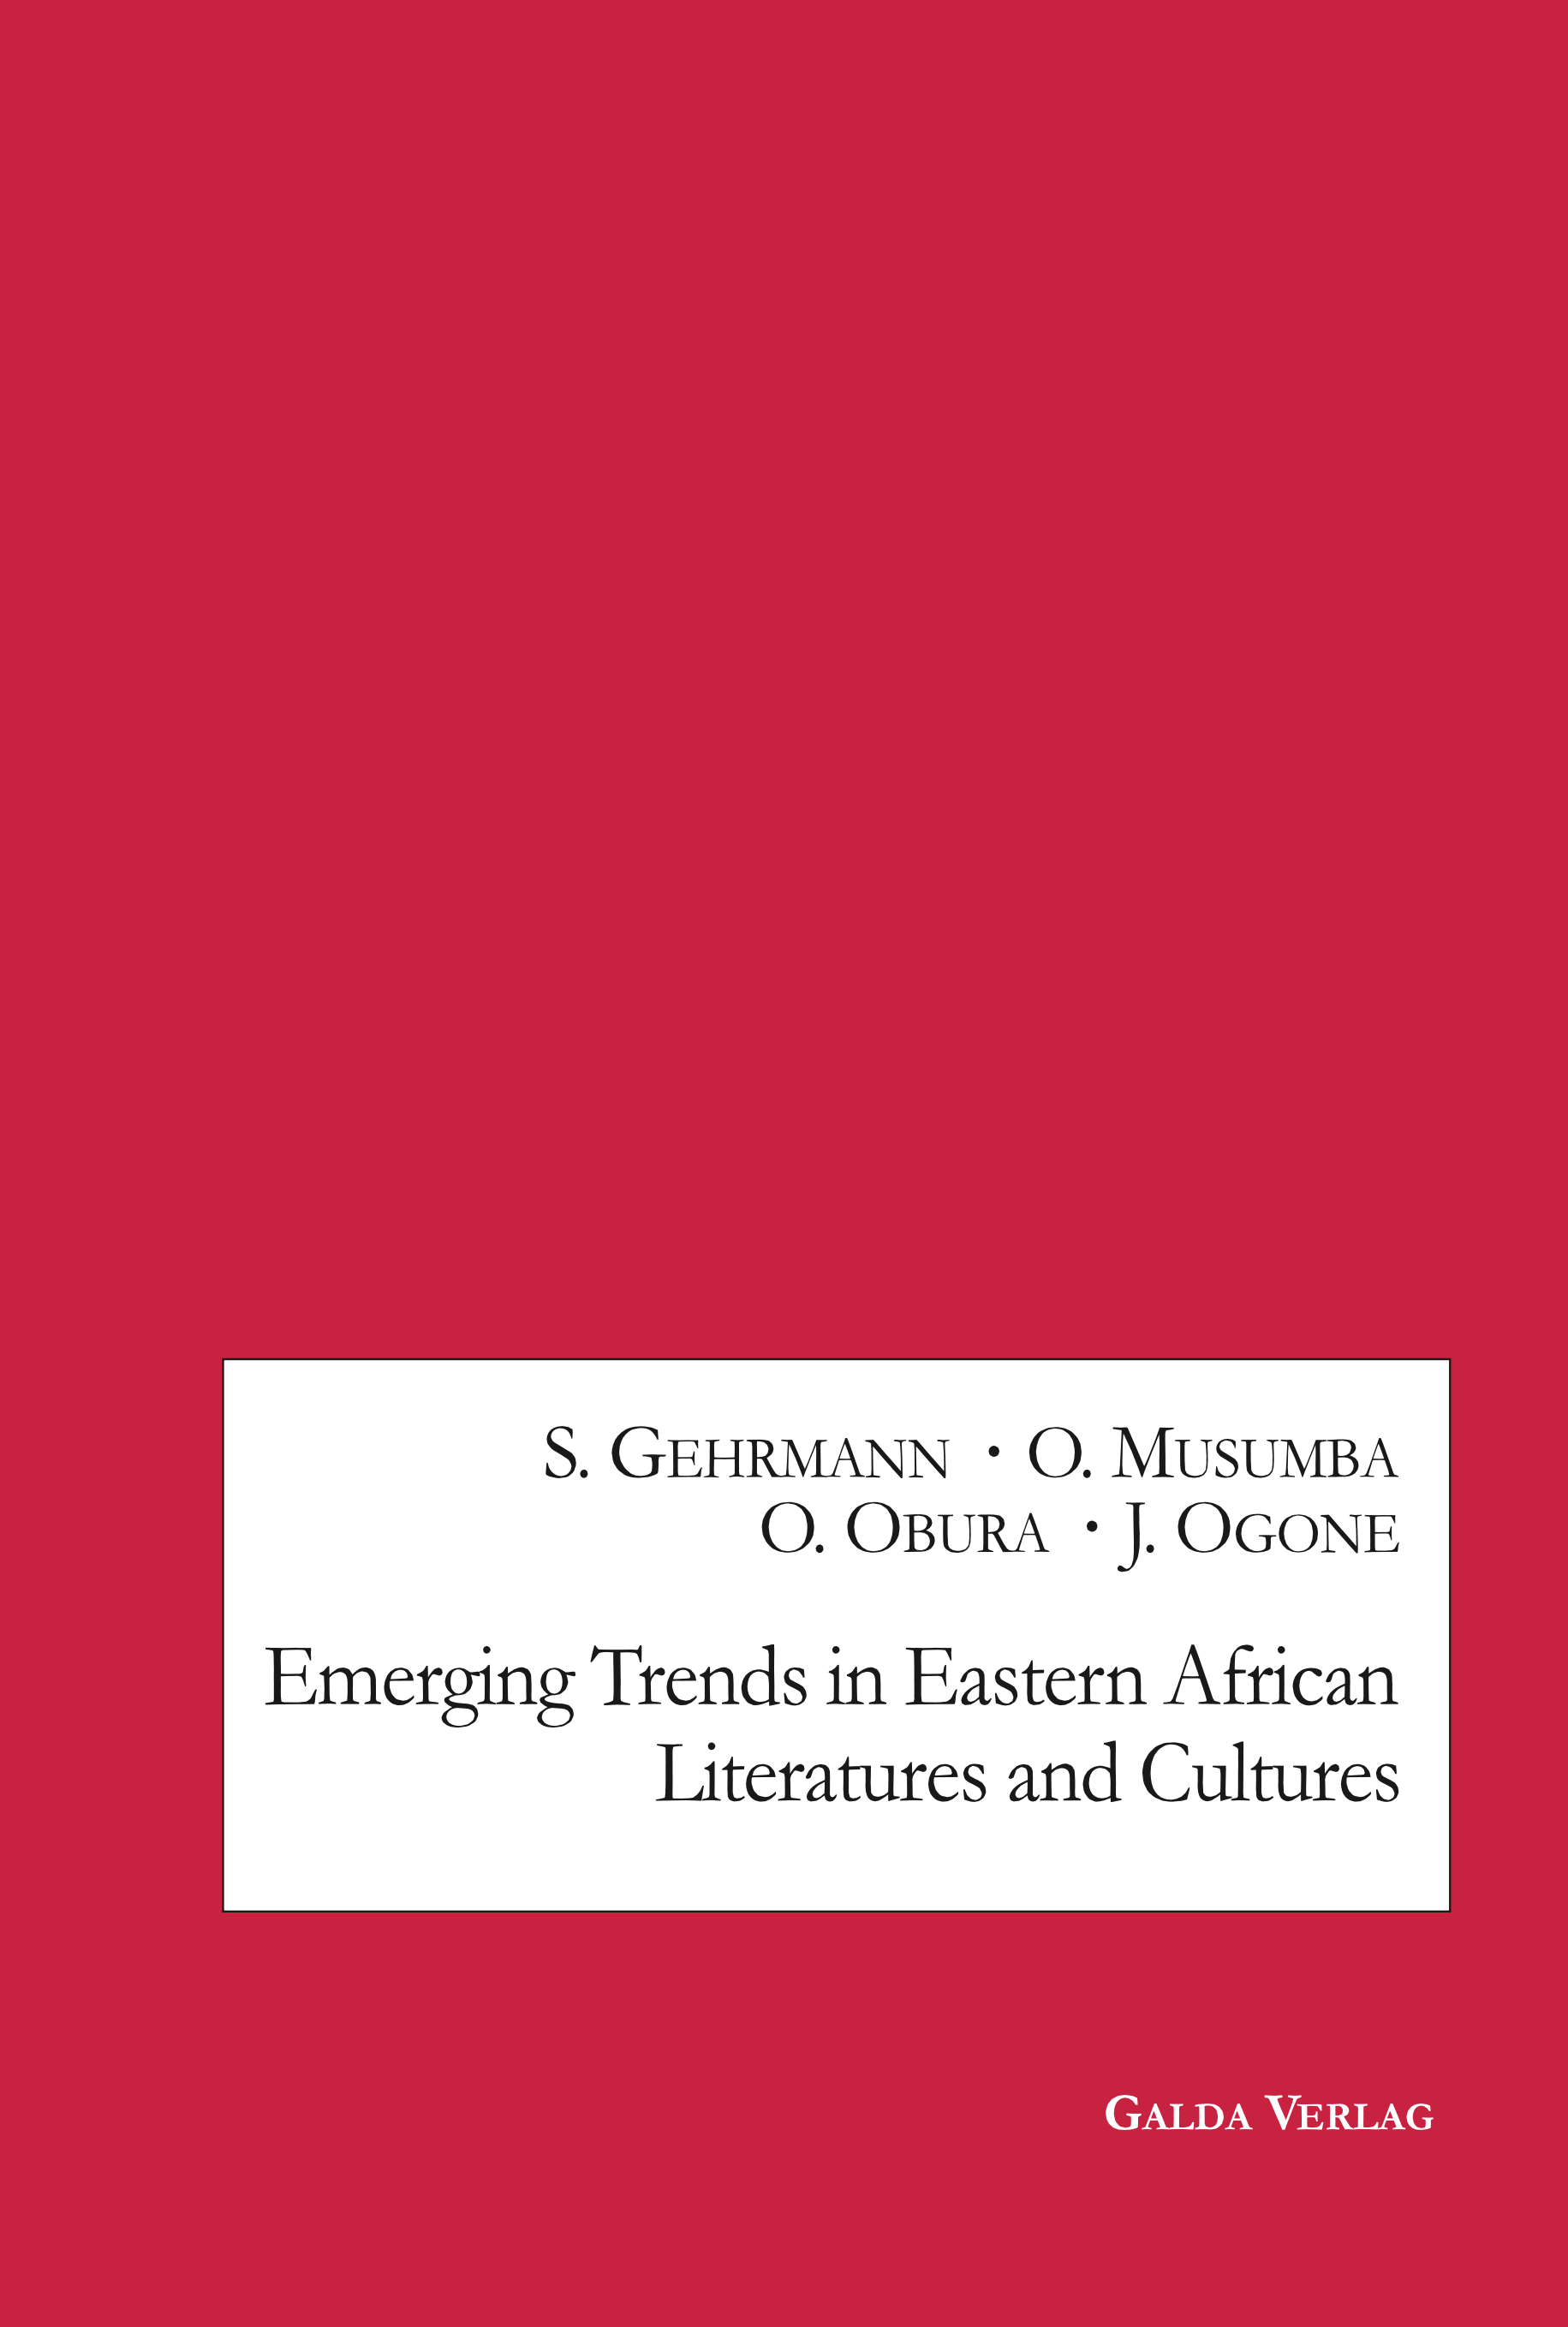 U1_Cover_Gehrmann-Emerging-Trends-Seite001.png